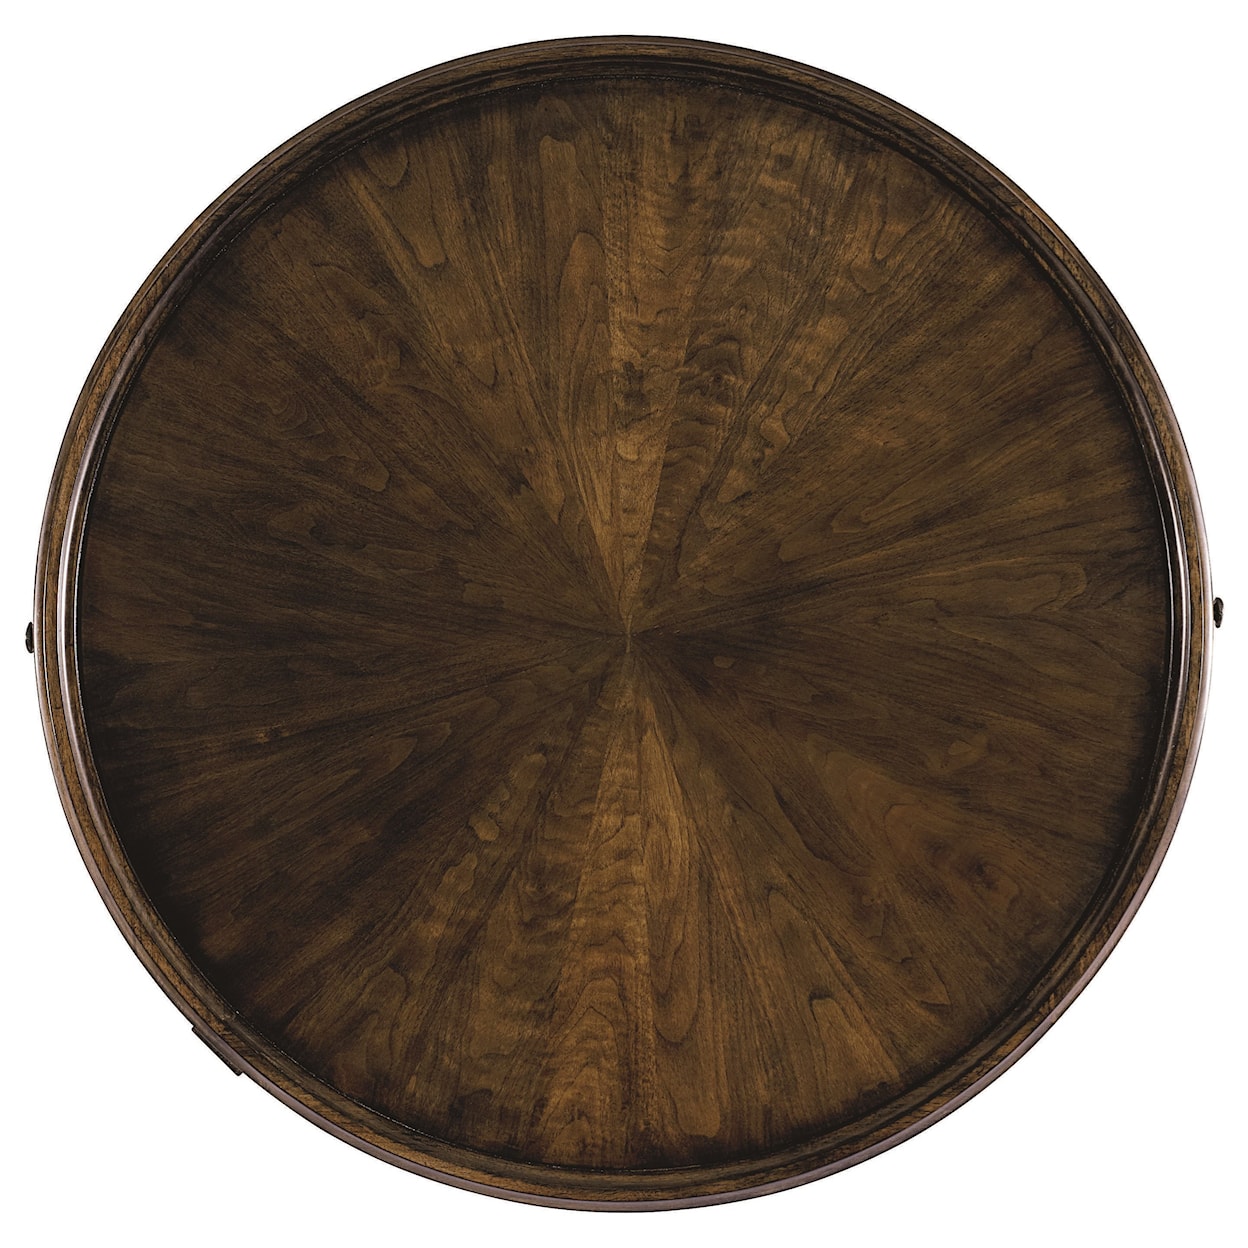 Bassett Palisades Round Cocktail Table